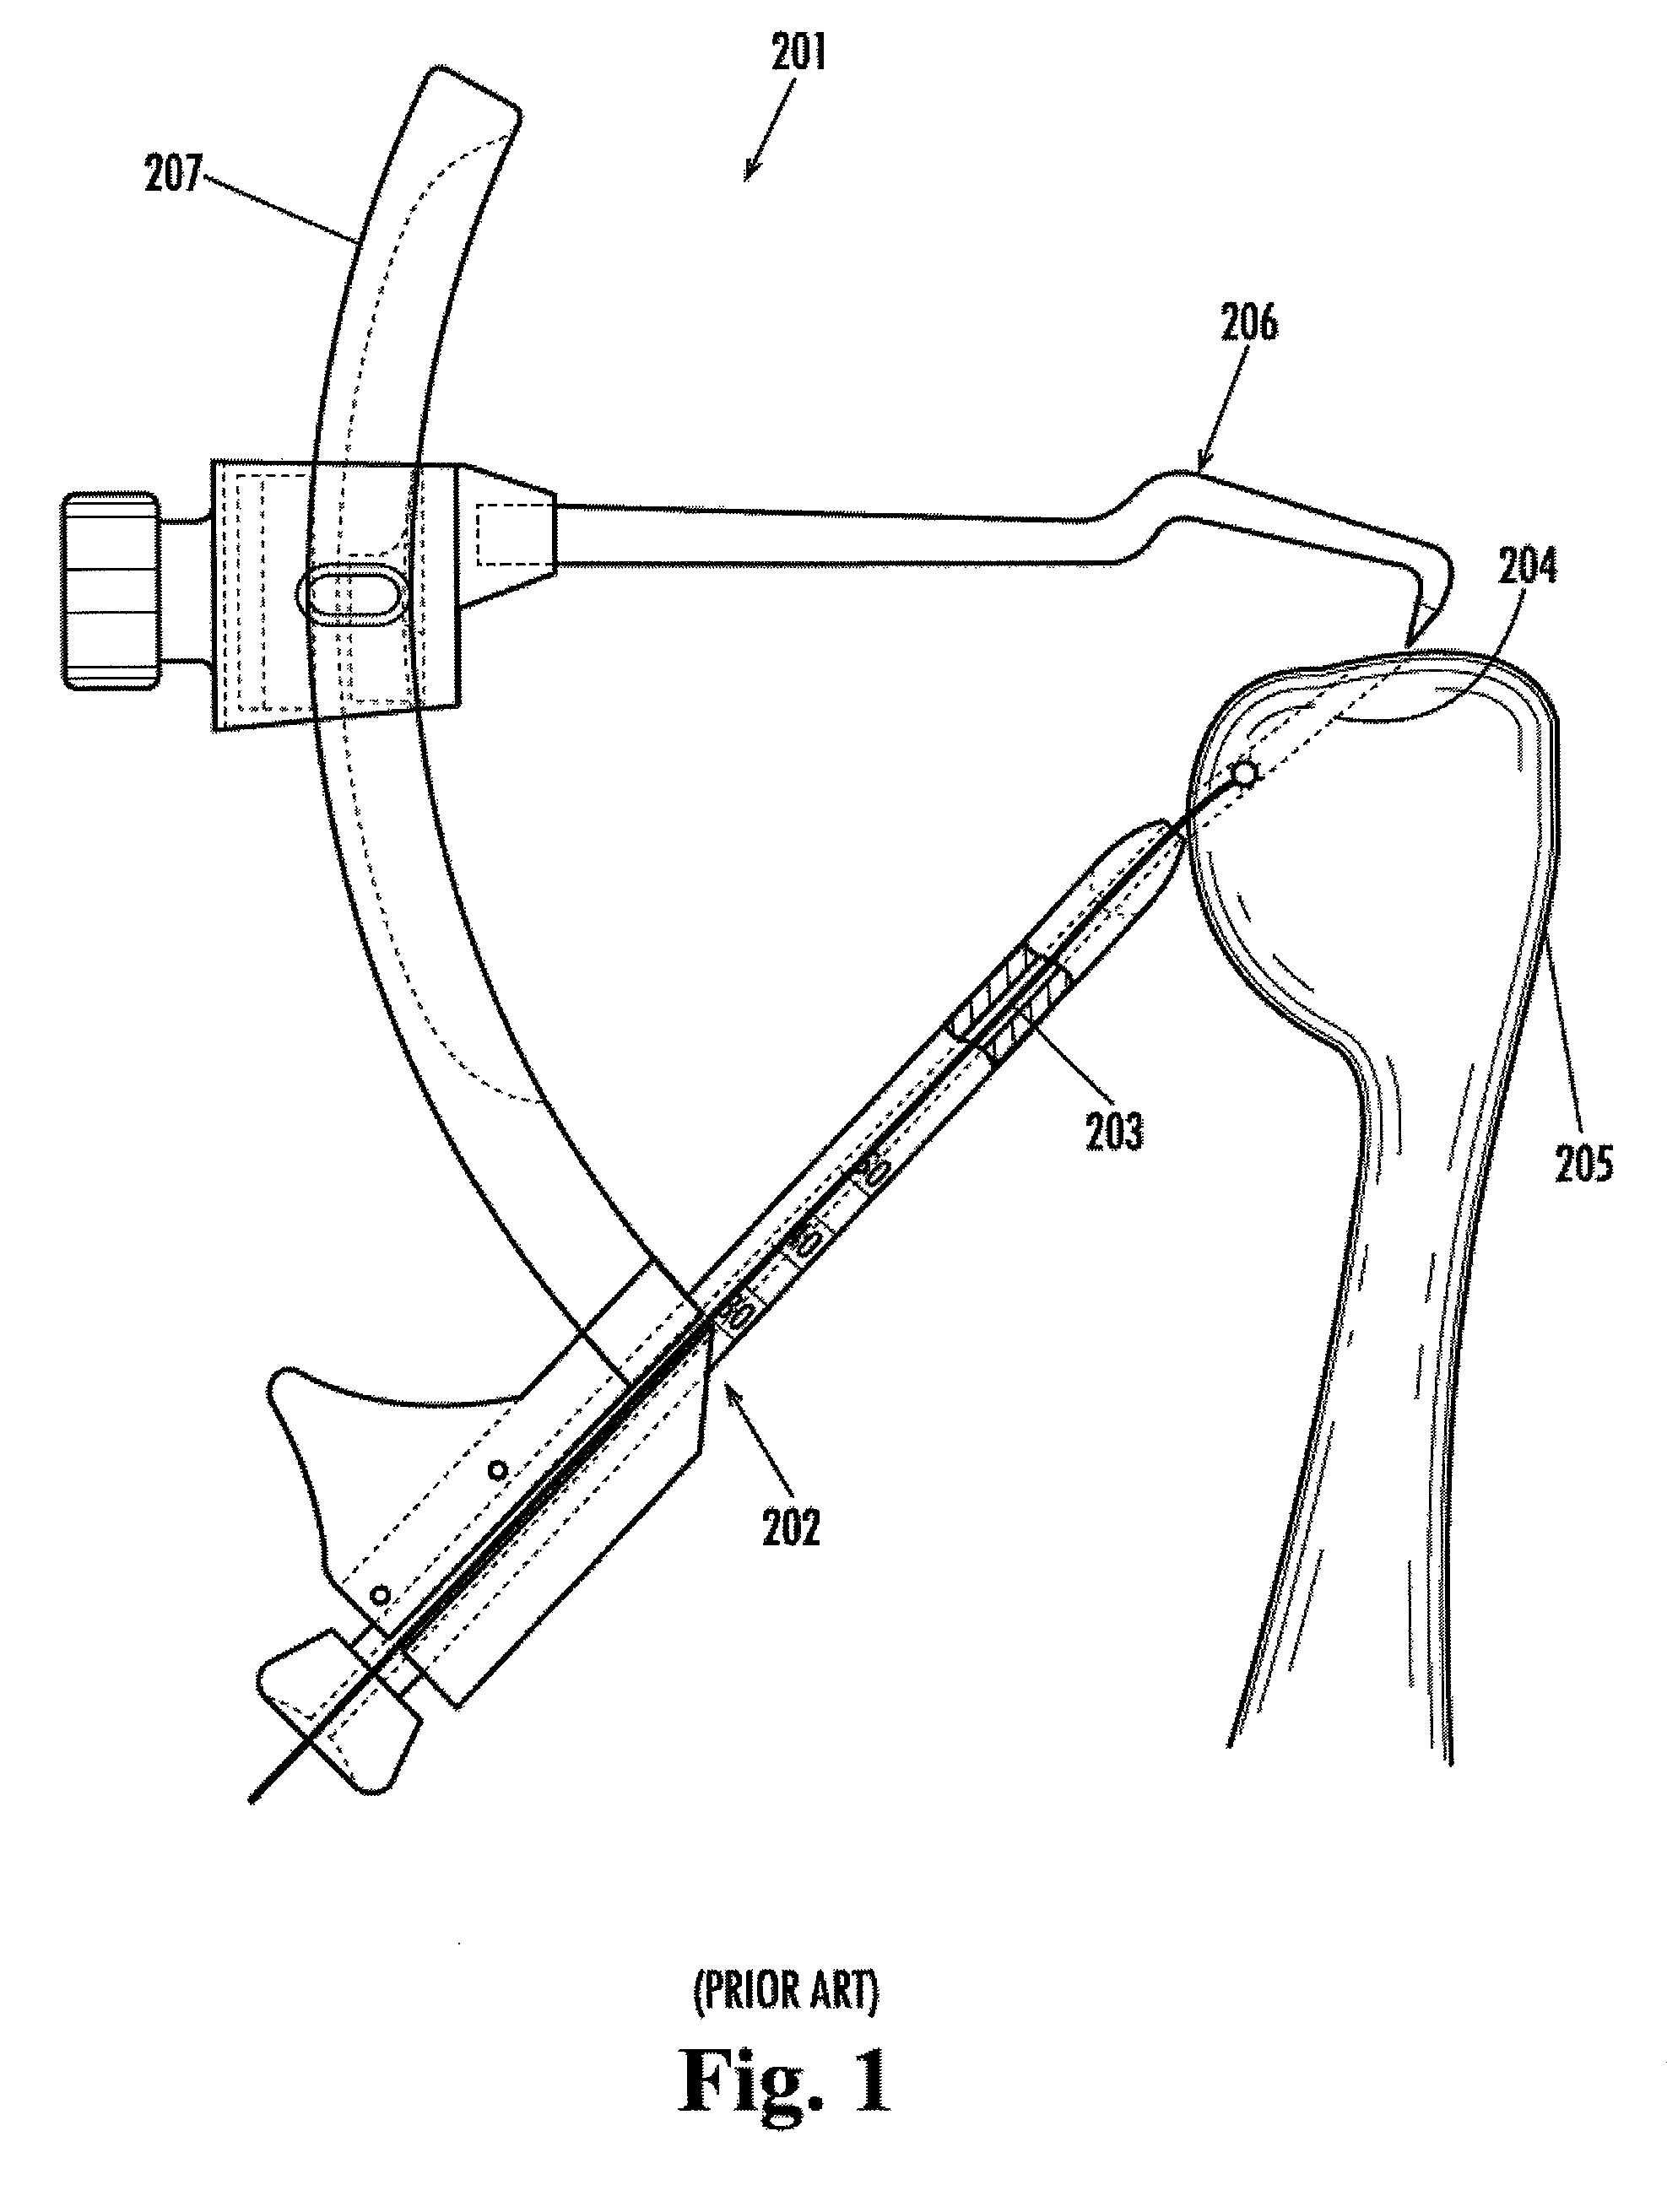 Device for the intraosteal seizing of sutures